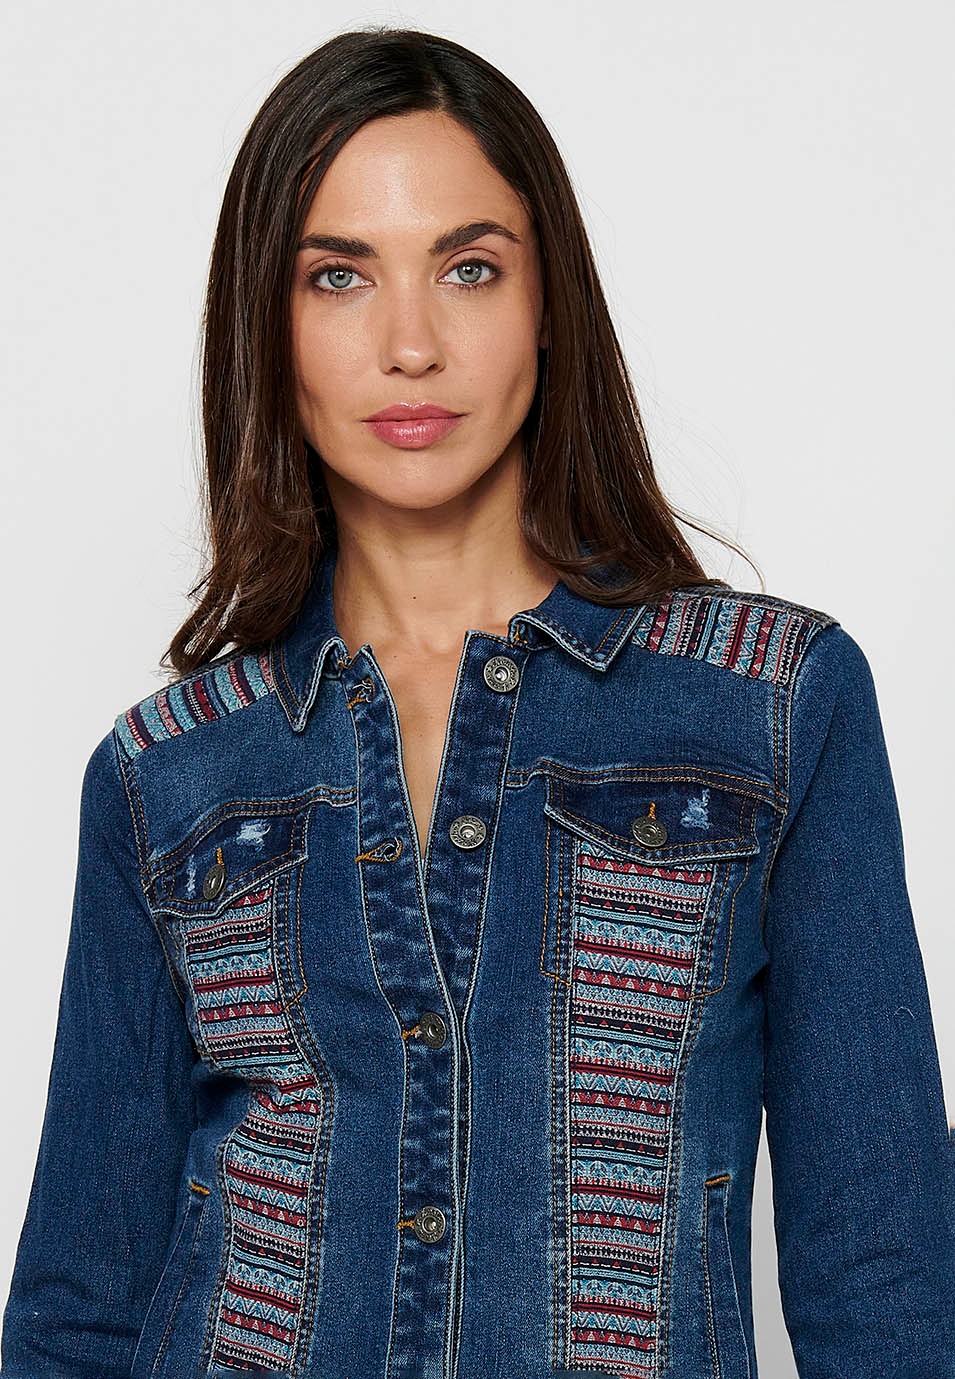 Long-sleeved denim jacket with ethnic fabric detail and front closure with blue buttons for women 1